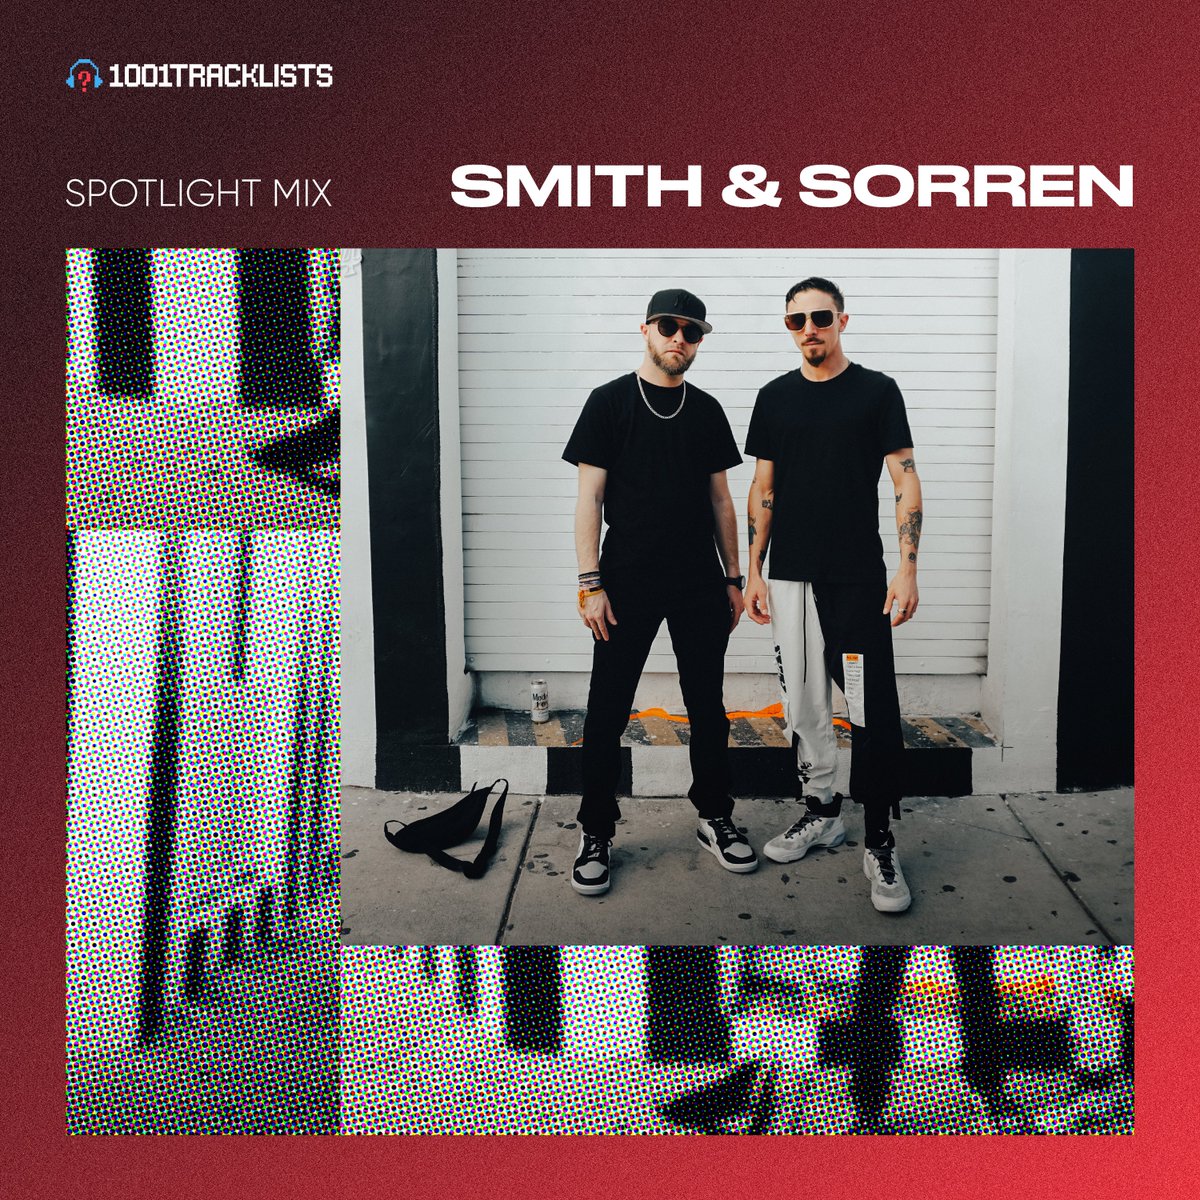 We're celebrating the launch of S&S Sound House with NYC duo @SmithSorren 😈 The guys take us in-depth on making their dream come to life, highlight loads of new music on the way & outline the bright future ahead 🙌 1001tracklists.com/stories/77hb72…